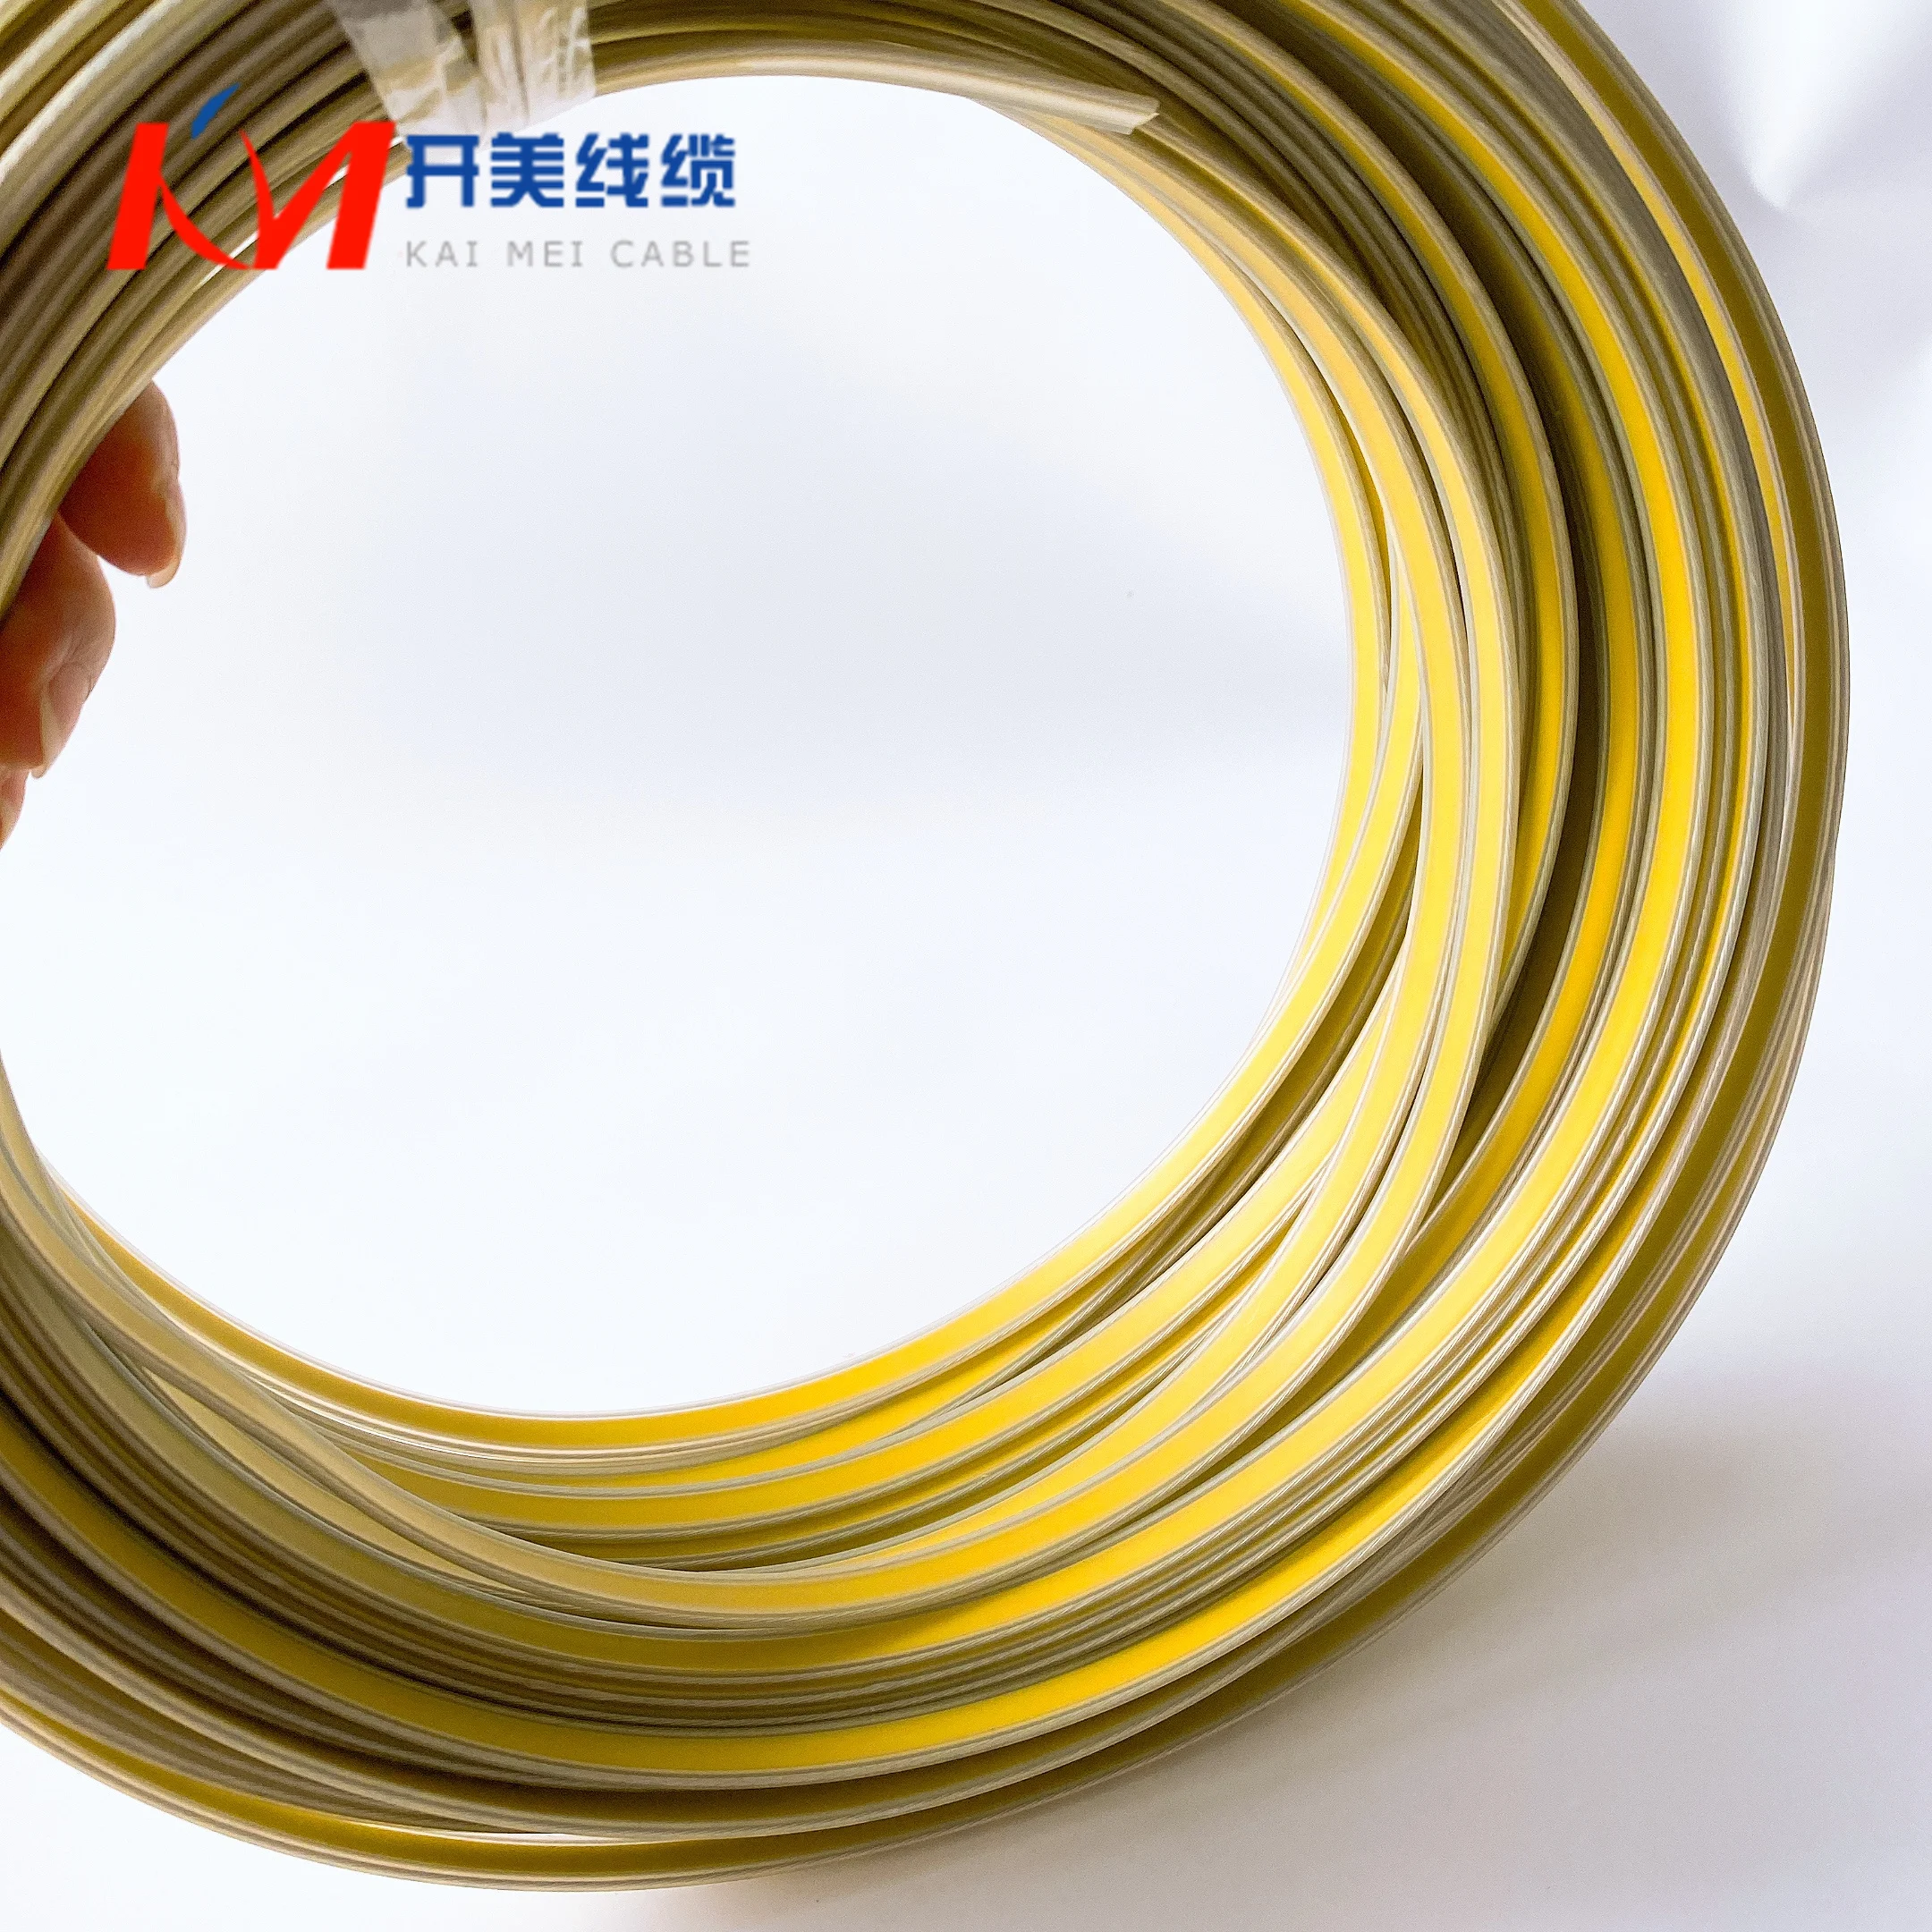 Oil Strip cable. Steel tape cable